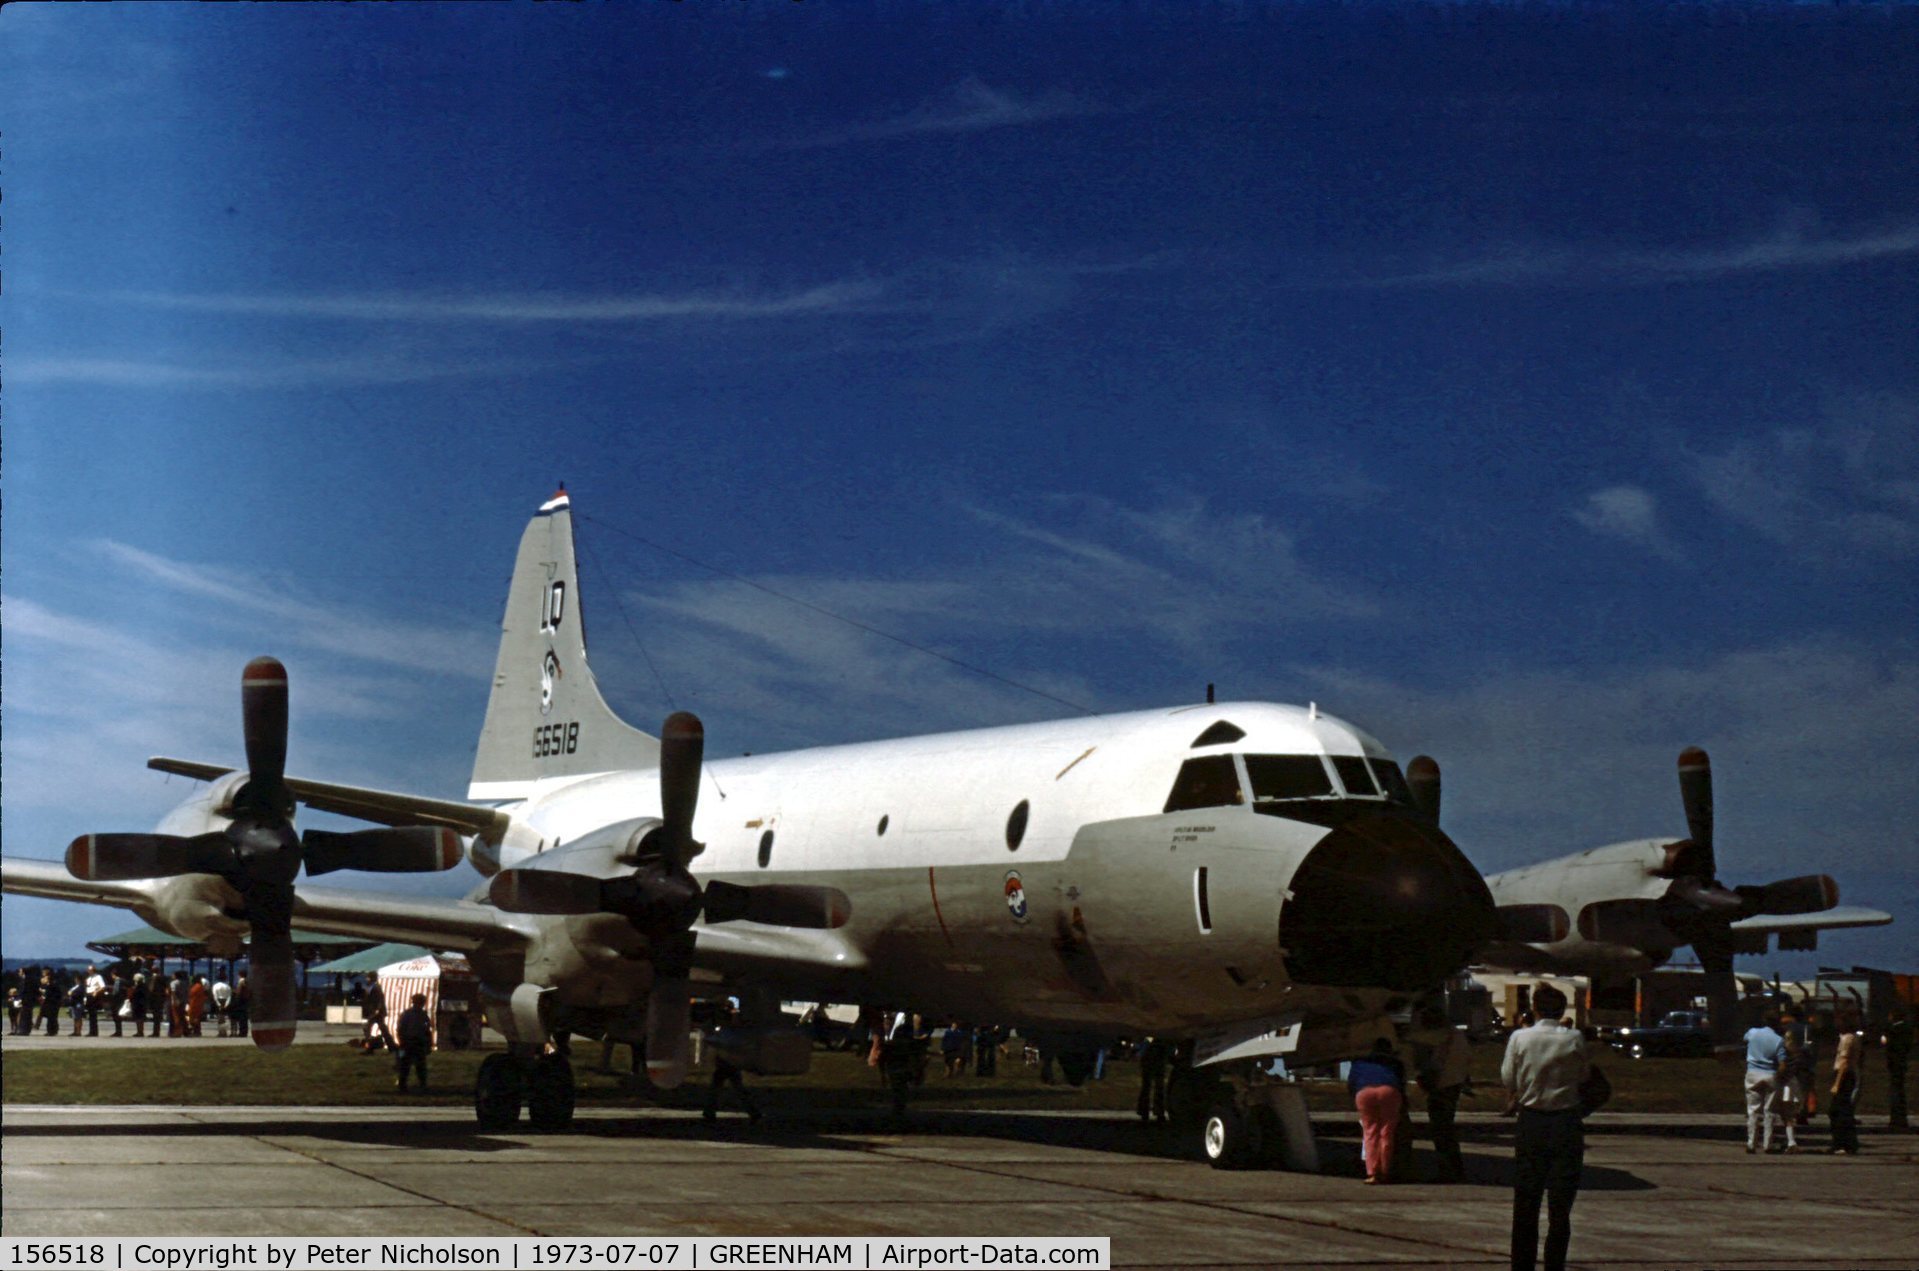 156518, 1969 Lockheed P-3C-110-LO Orion C/N 285A-5512, P-3C Orion of Patrol Squadron VP-56 at the 1973 Intnl Air Tattoo at RAF Greenham Common.